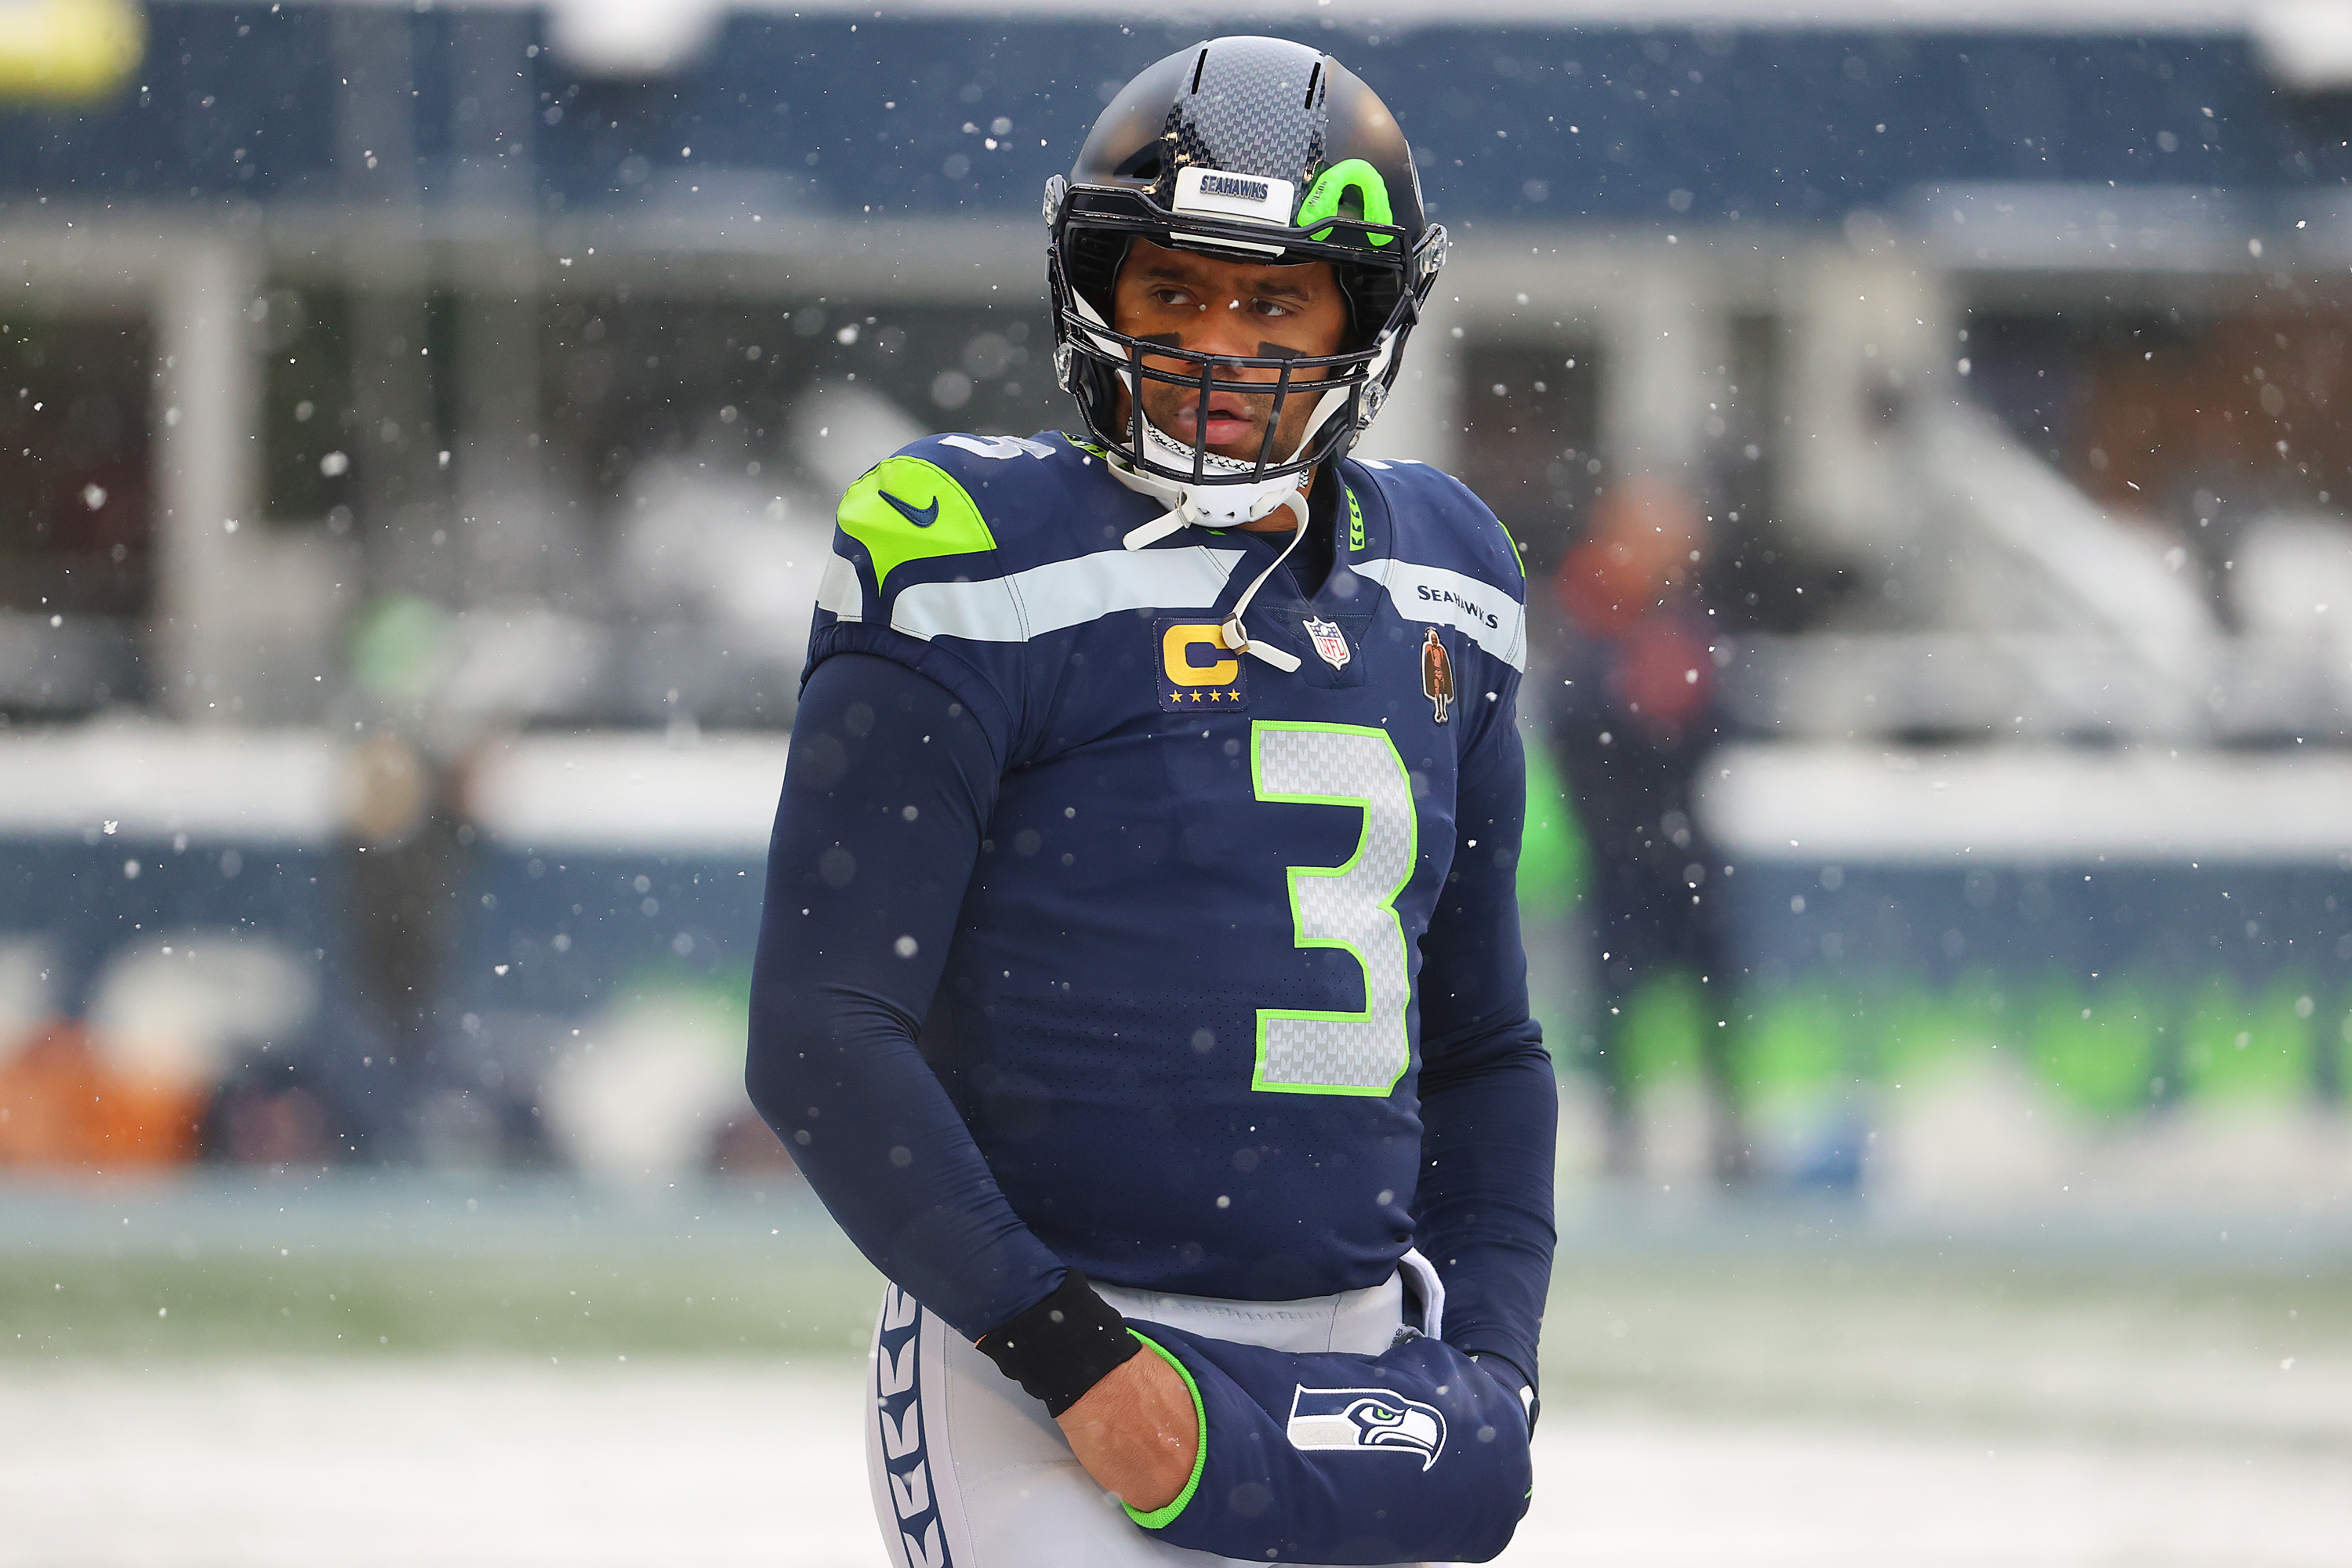 Seahawks QB Russell Wilson warms up before game against the Bears